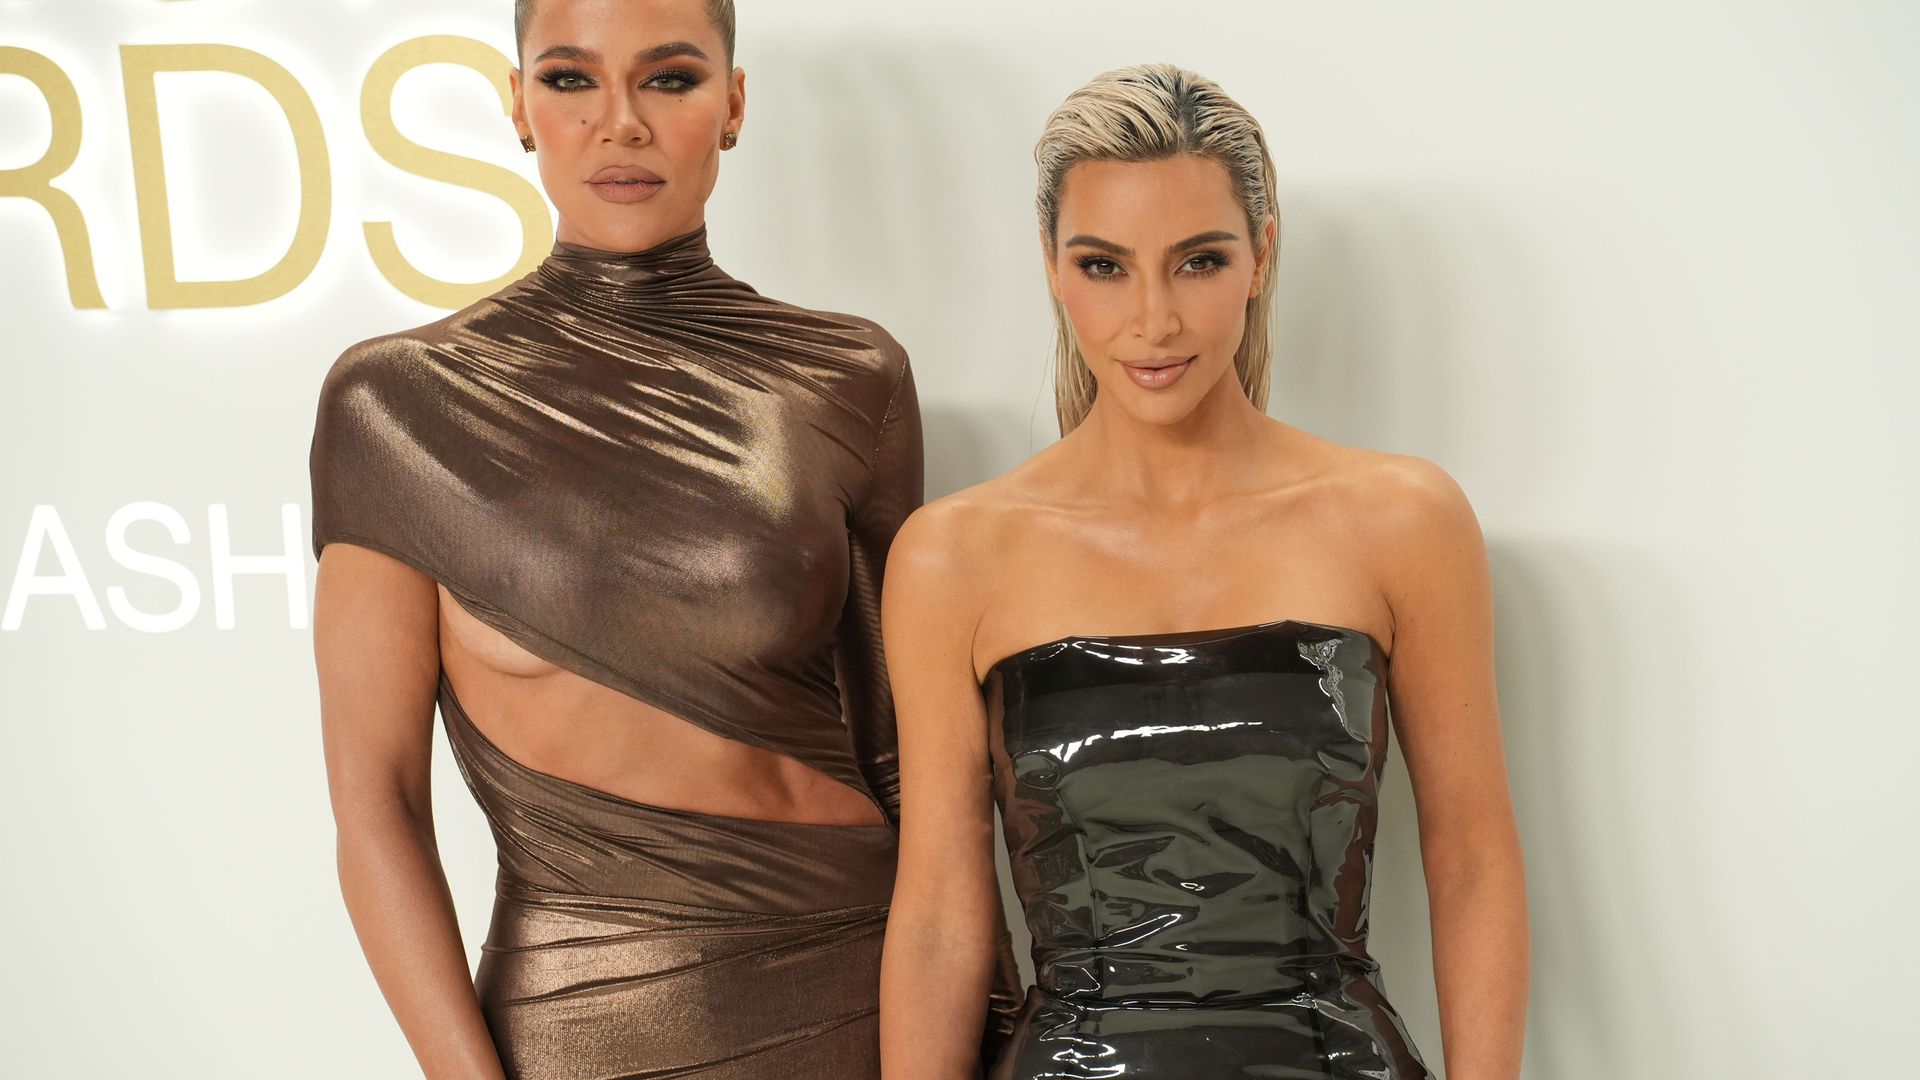 Kim and Khloé Kardashian: The special guests at Andrea Bocelli's 30th anniversary concert